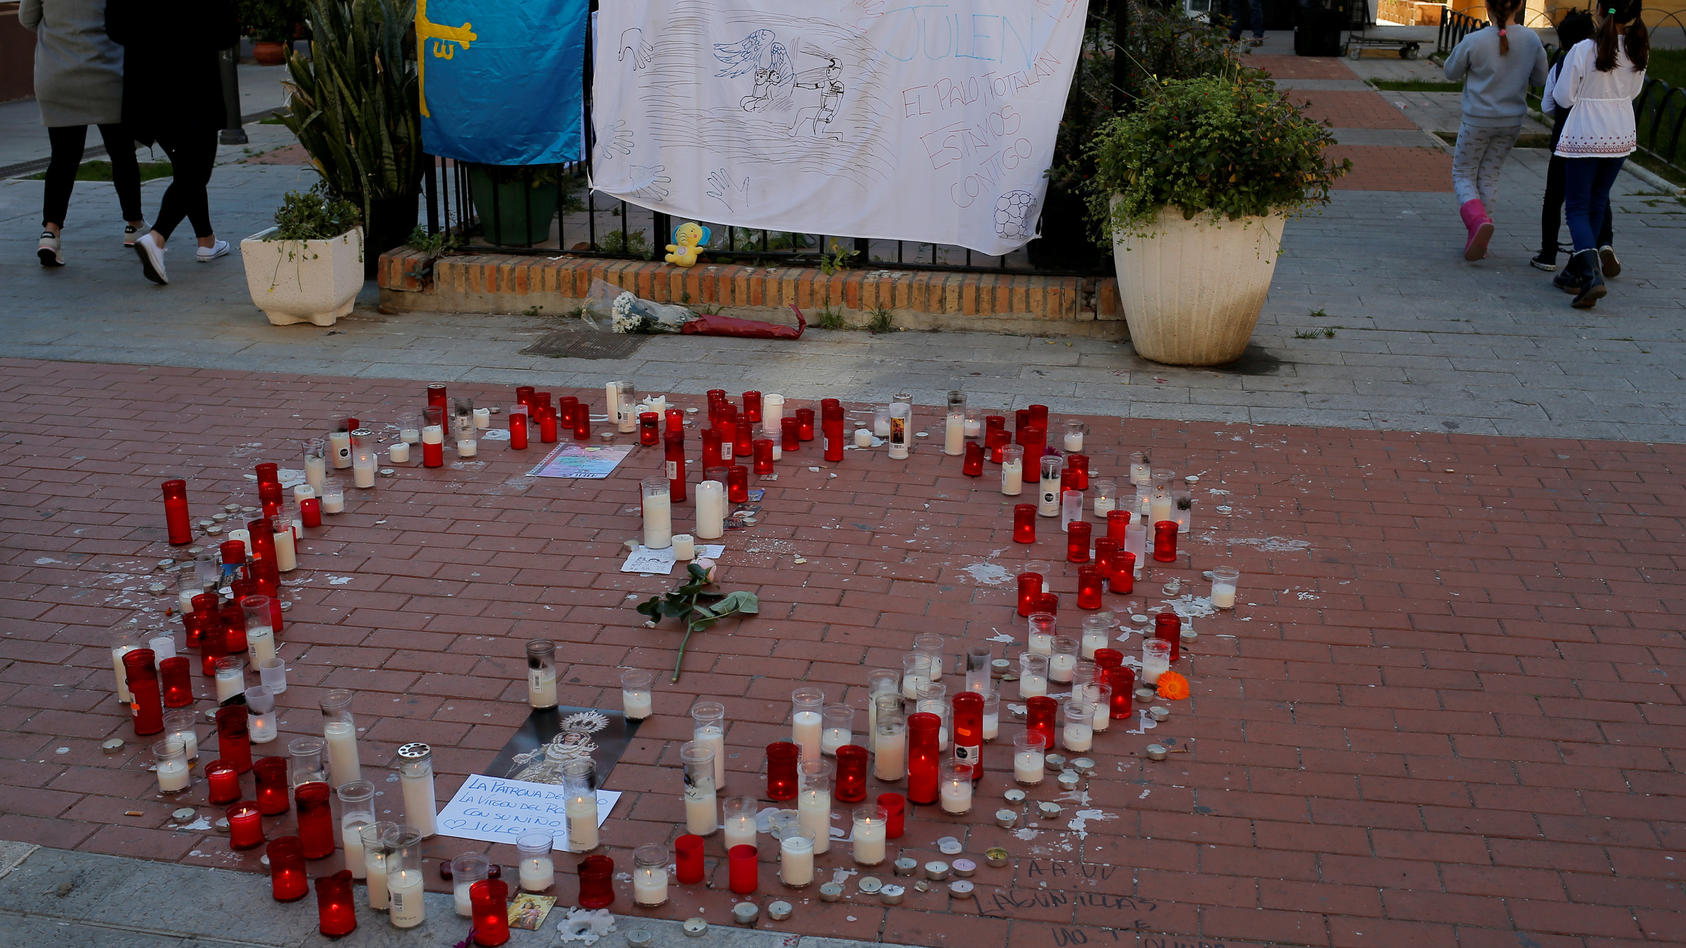 Candles formed in the shape of a heart in remembrance of Julen who fell into deep well in Totalan, are pictured near his house in Malaga